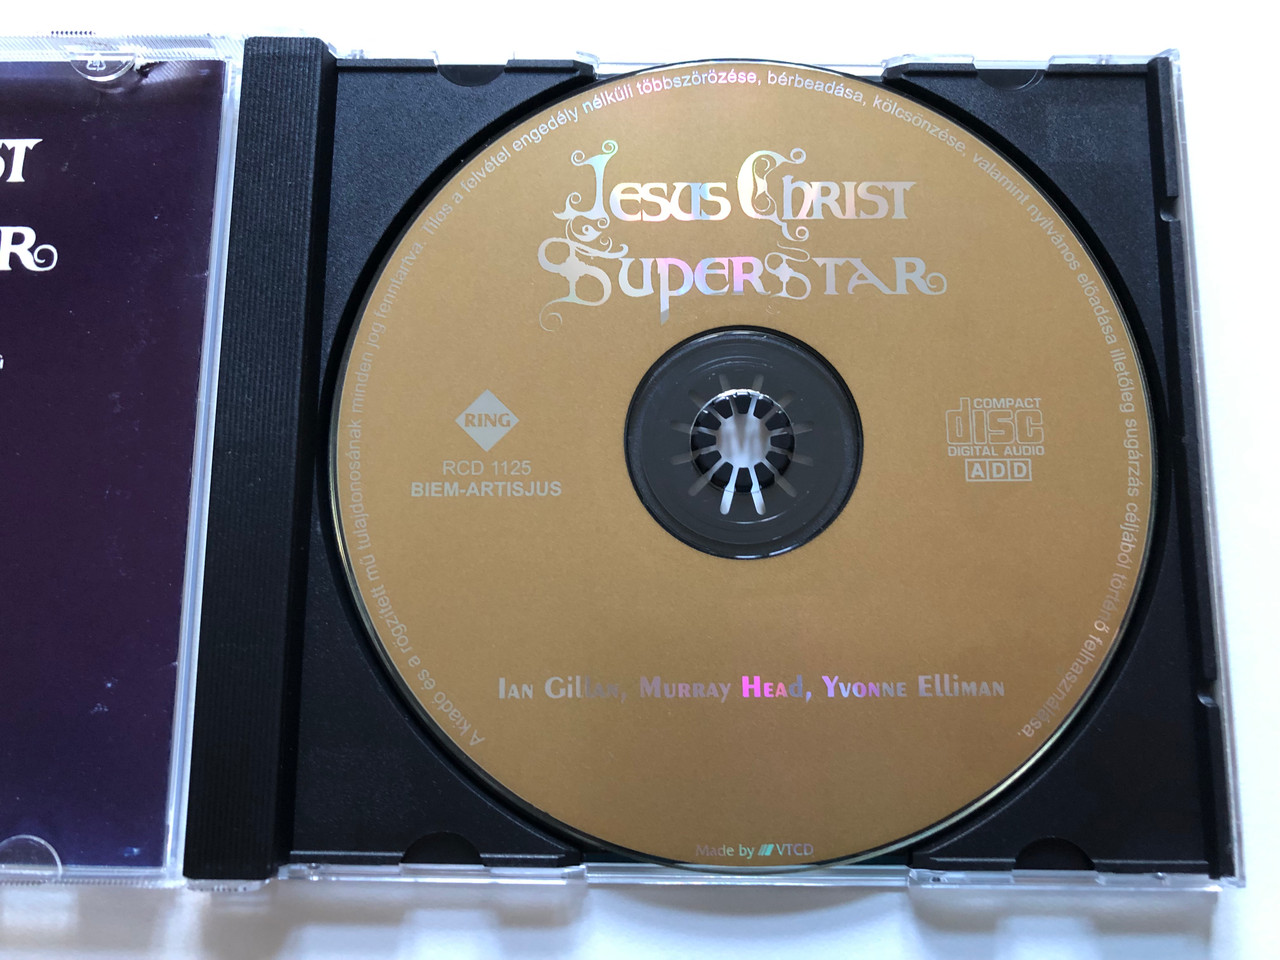 https://cdn10.bigcommerce.com/s-62bdpkt7pb/products/0/images/307883/Jesus_Christ_Superstar_-_A_Rock_Opera_by_Andrew_Lloyd_Webber_and_Tim_Rice_Ring_Audio_CD_RCD_1125_3__79454.1698906567.1280.1280.JPG?c=2